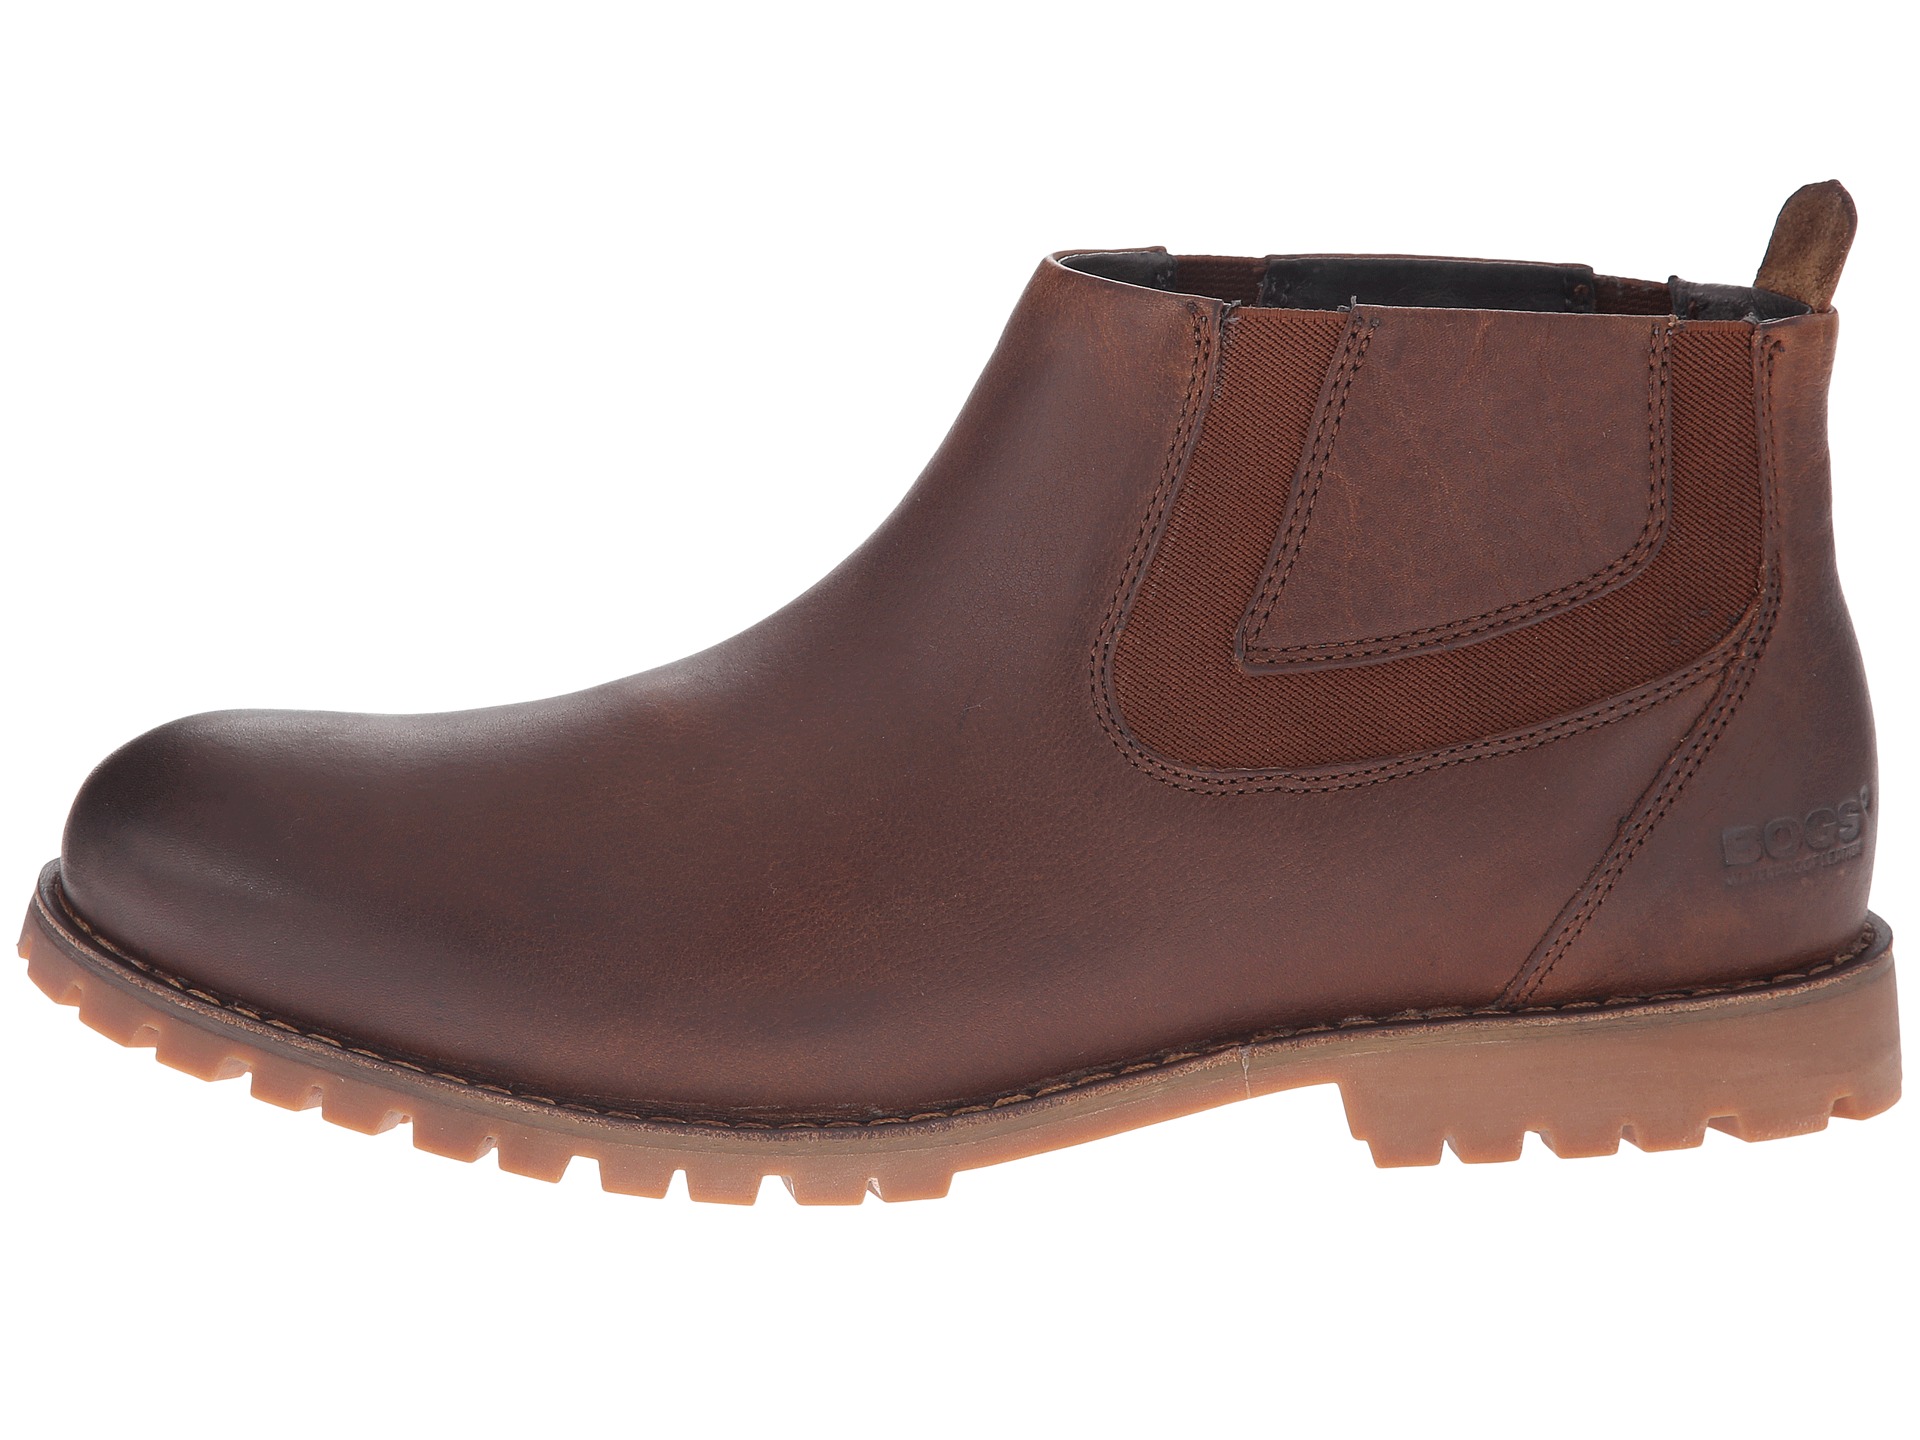 Bogs Johnny Chelsea Boot Scotch - Zappos.com Free Shipping BOTH Ways